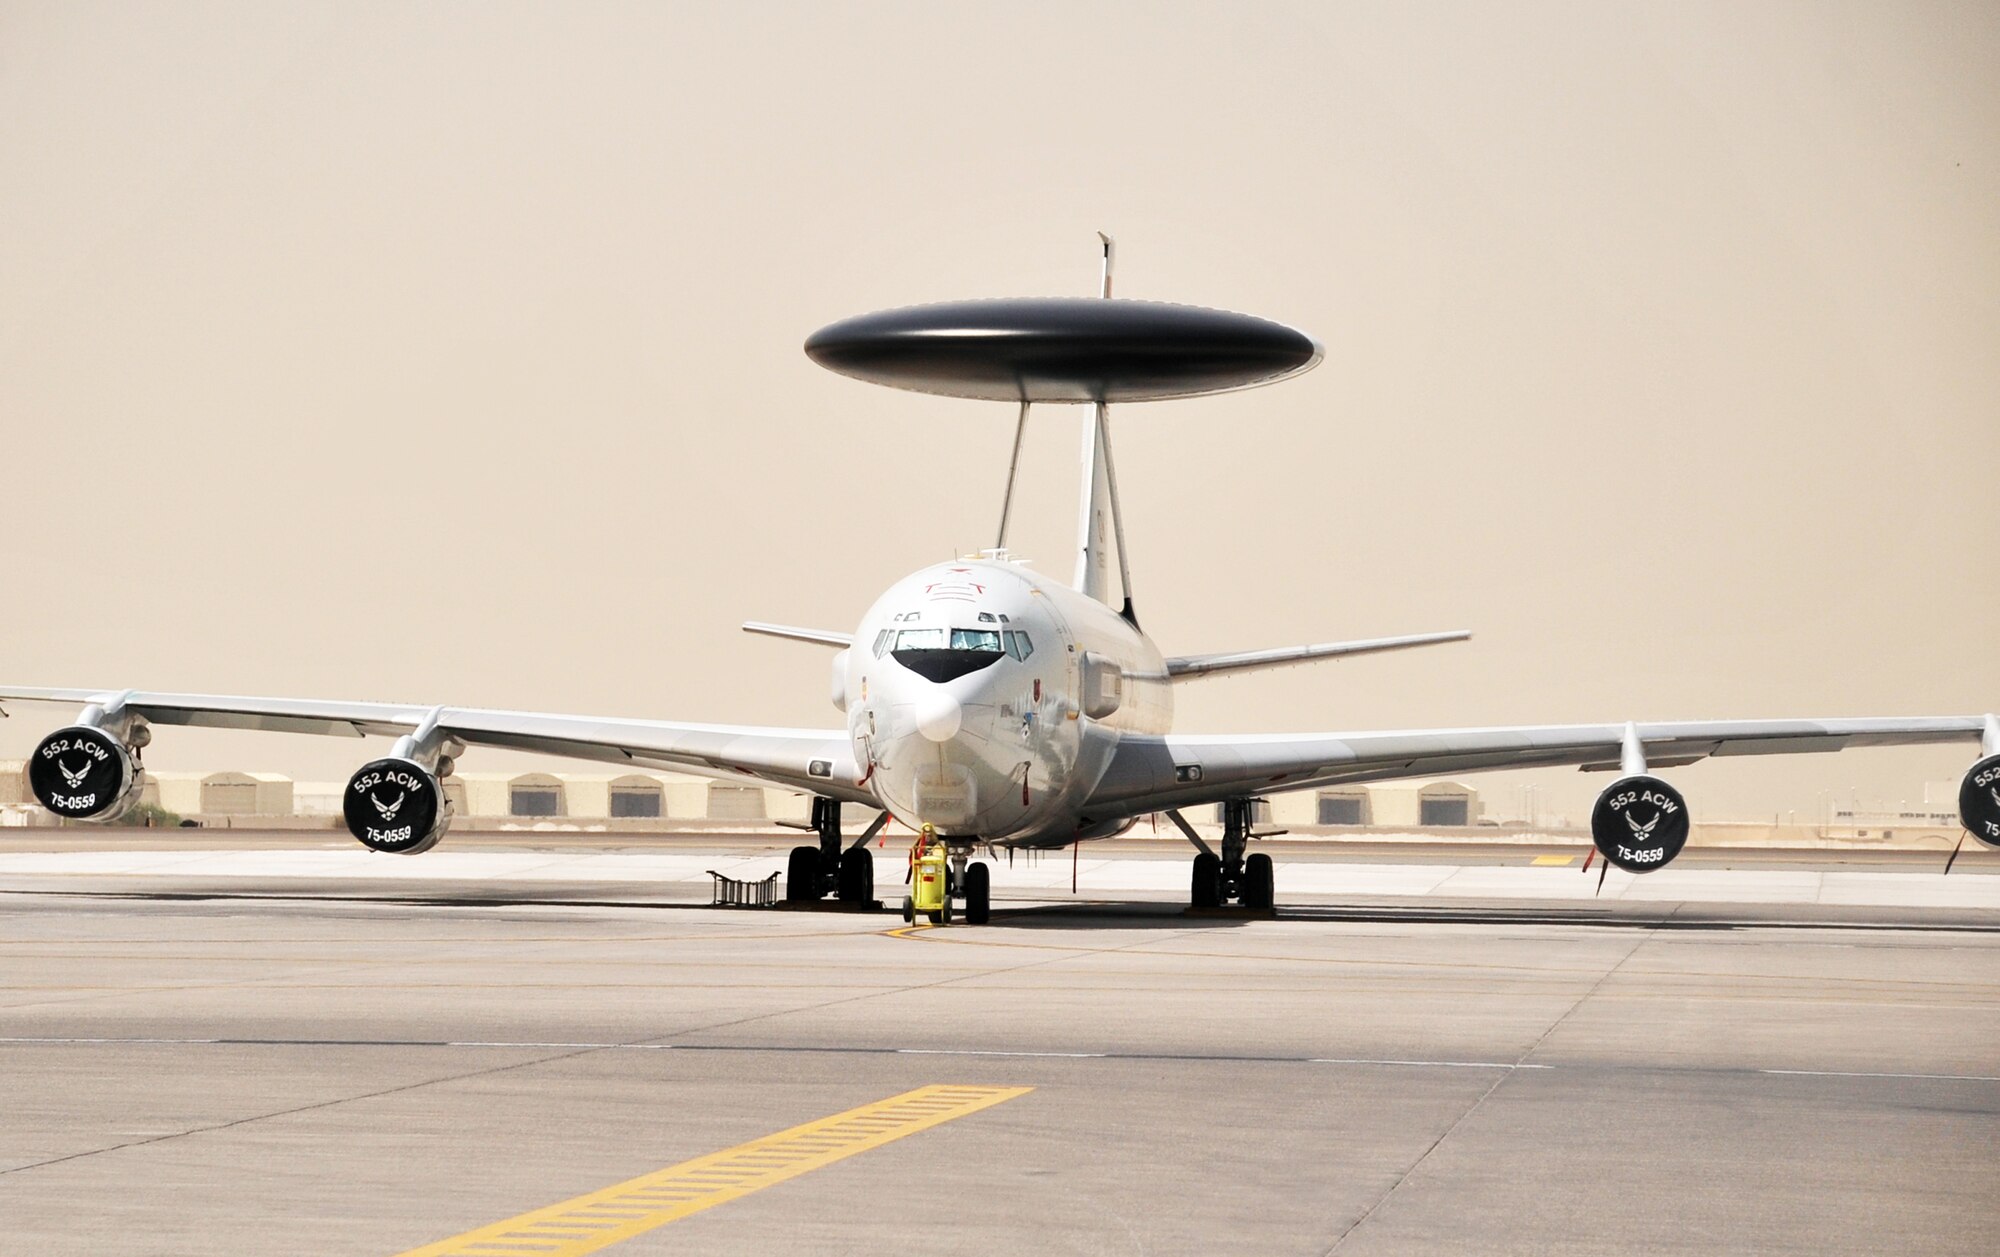 An E-3 Sentry Airborne Warning and Control System aircraft is parked on the flightline for the 380th Air Expeditionary Wing operations area at a non-disclosed base in Southwest Asia on April 27, 2010. The deployed E-3 Sentry aircraft are assigned with the 965th Expeditionary Airborne Air Control Squadron and are deployed from Tinker Air Force Base, Okla. In the first three months of 2010, E-3 Sentry aircraft with the 380th Air Expeditionary Wing have flown more than 100 combat missions and handled more than 5,000 aircraft in air battle management for combat operations. (U.S. Air Force Photo/Master Sgt. Scott T. Sturkol/Released)